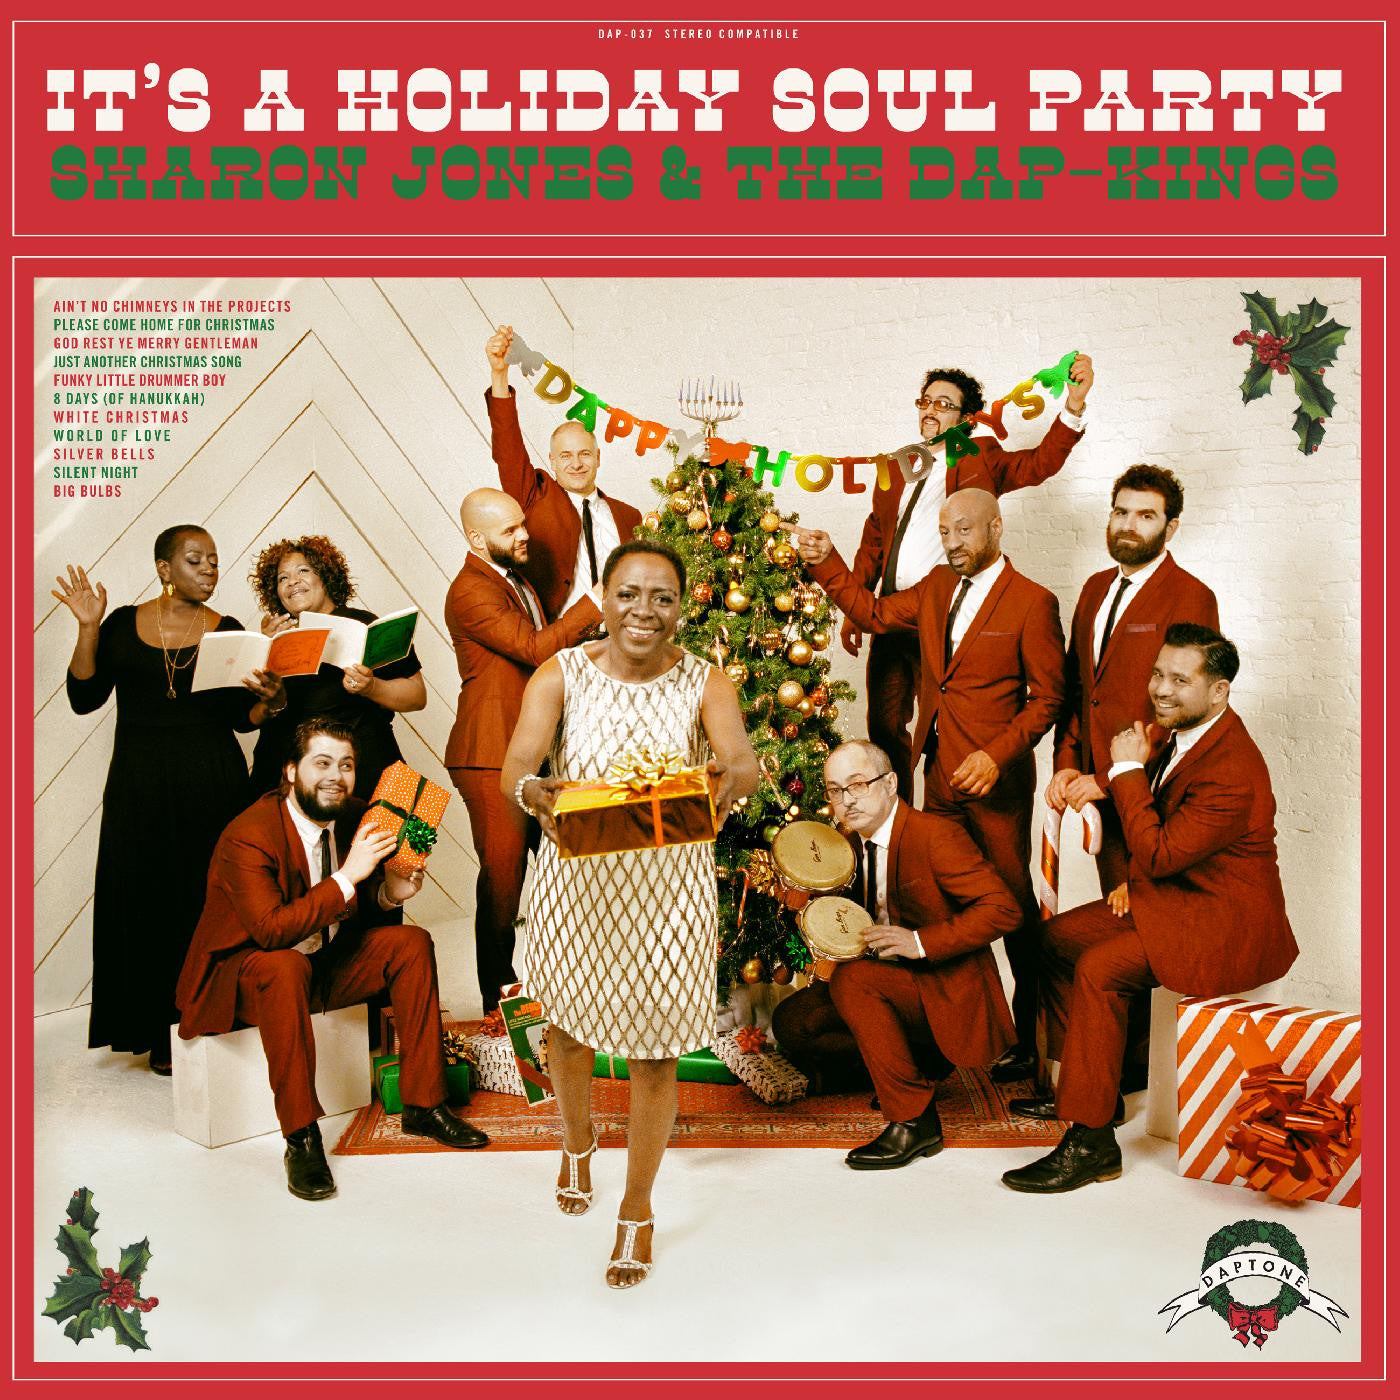 Sharon Jones and the Dap-Kings - It's a Holiday Soul Party! (Vinyl LP)